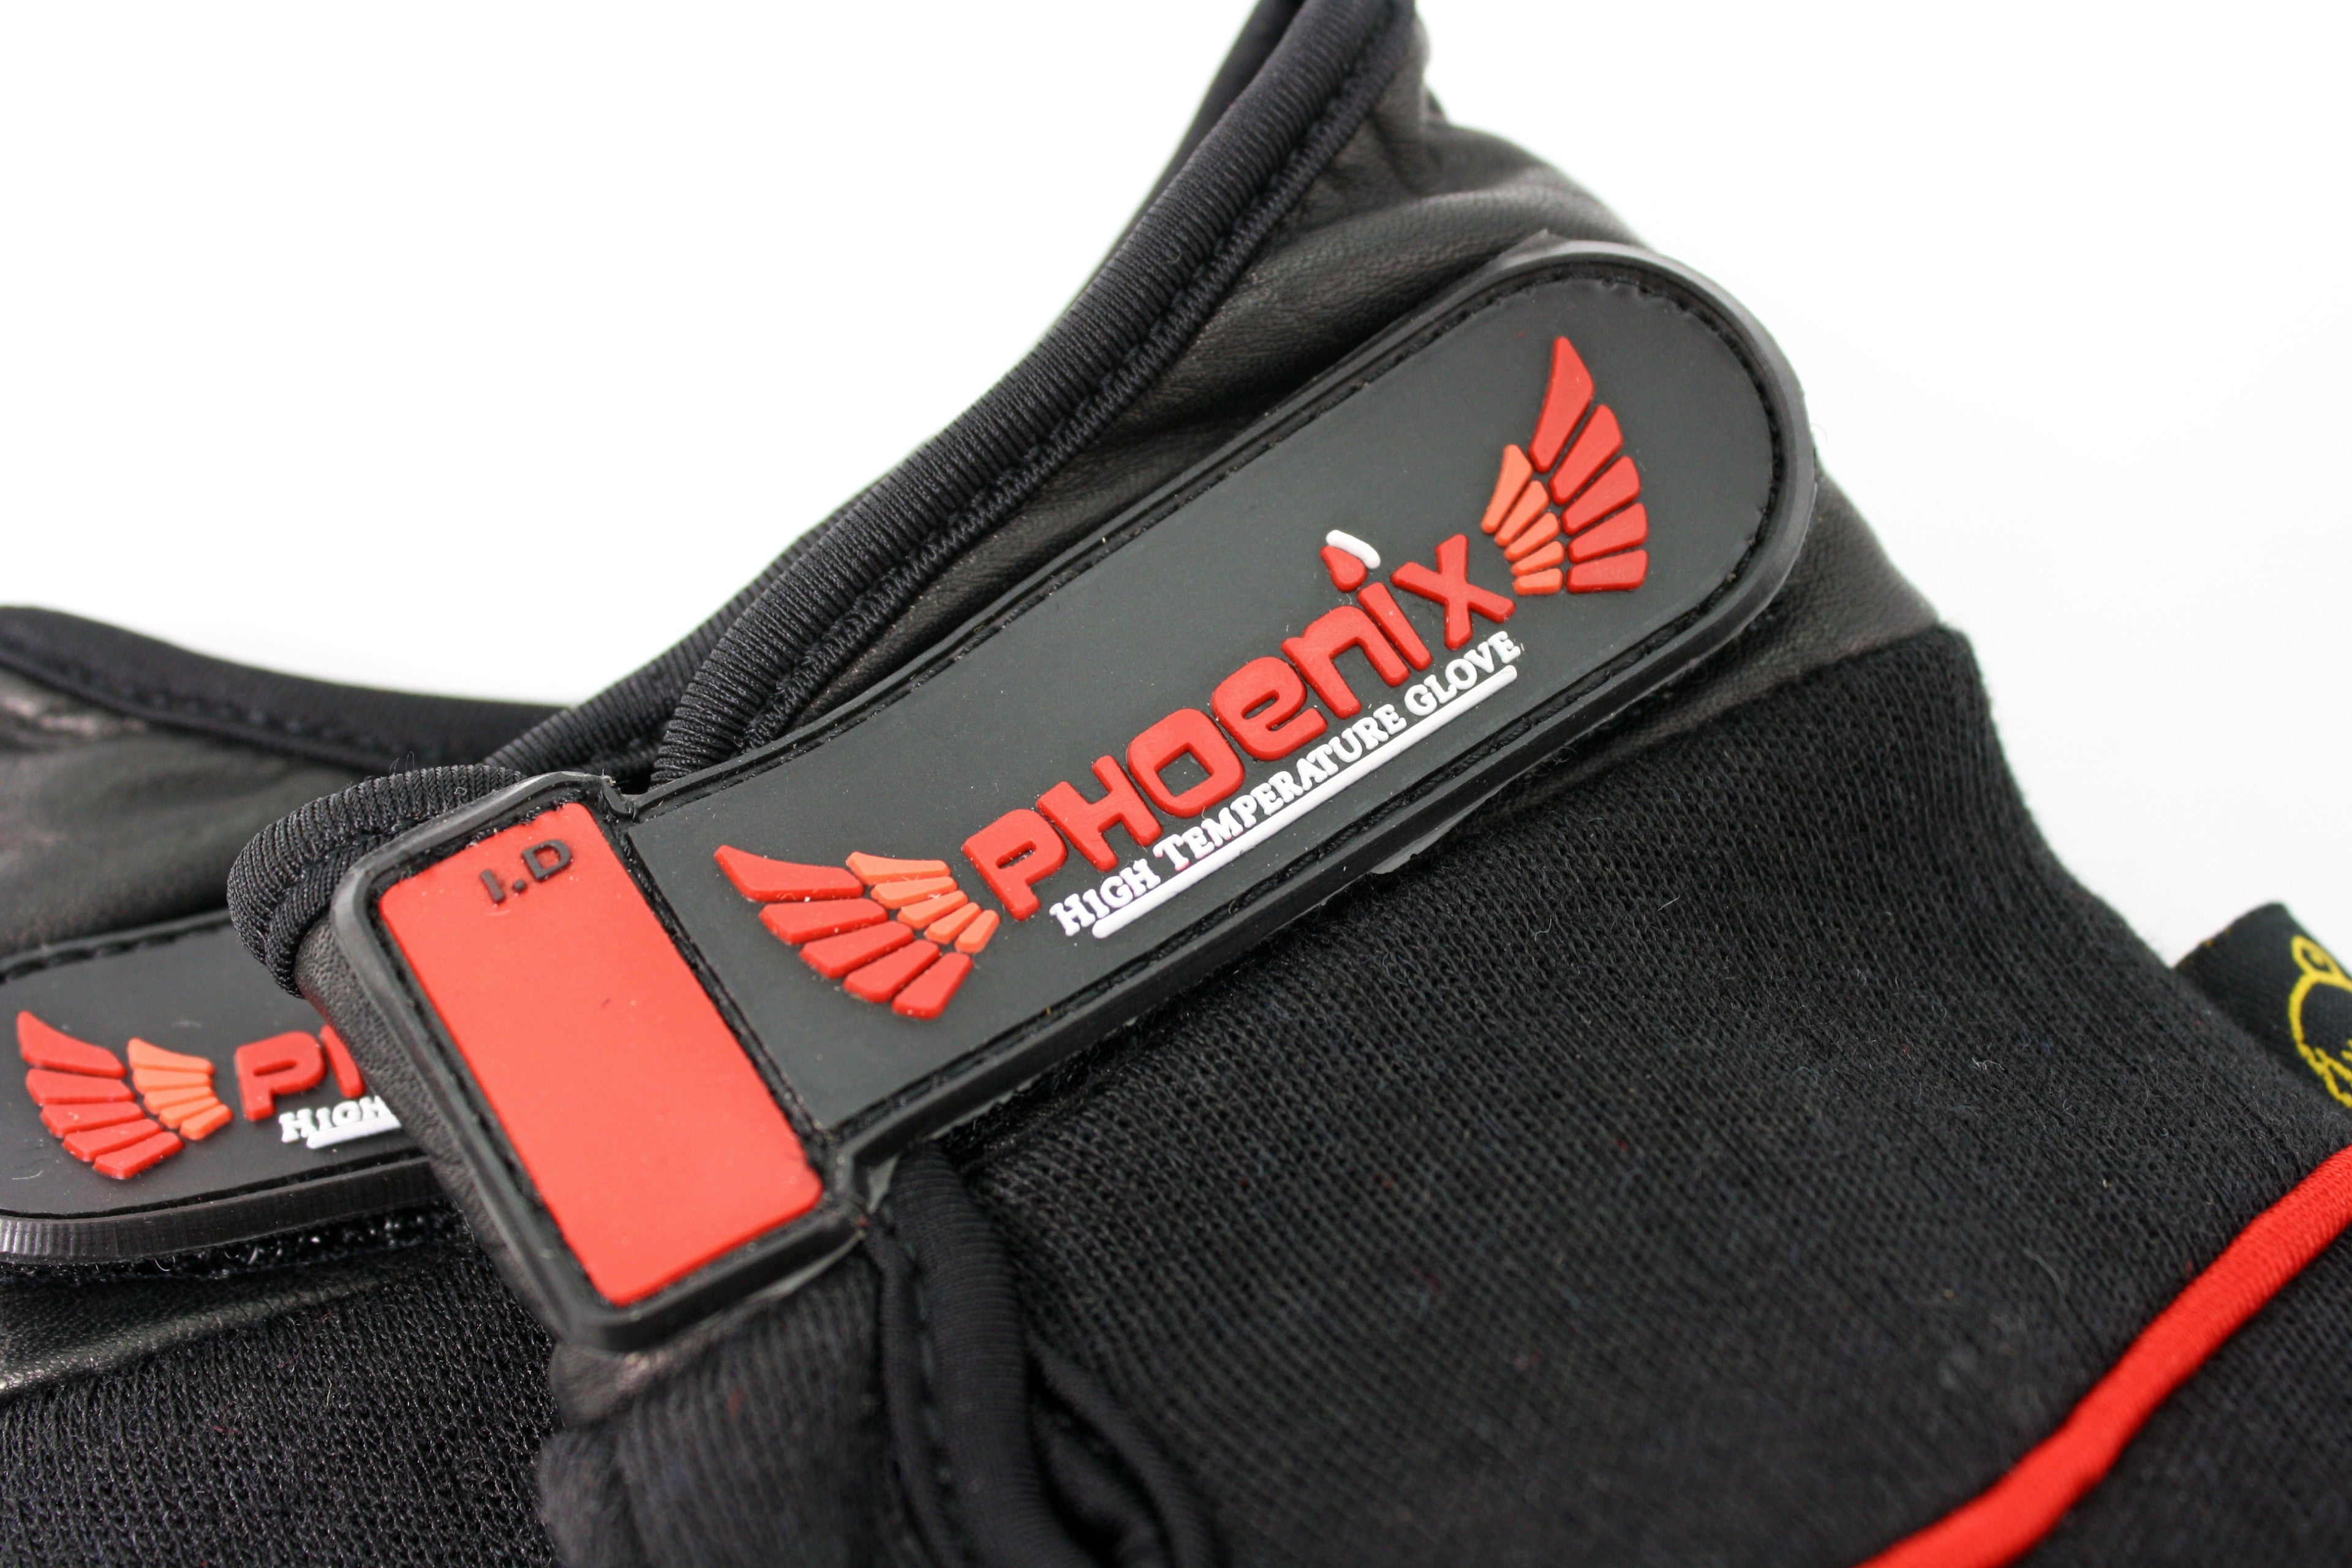 Close up of the 'Phoenix' logo at the wrist of the glove.